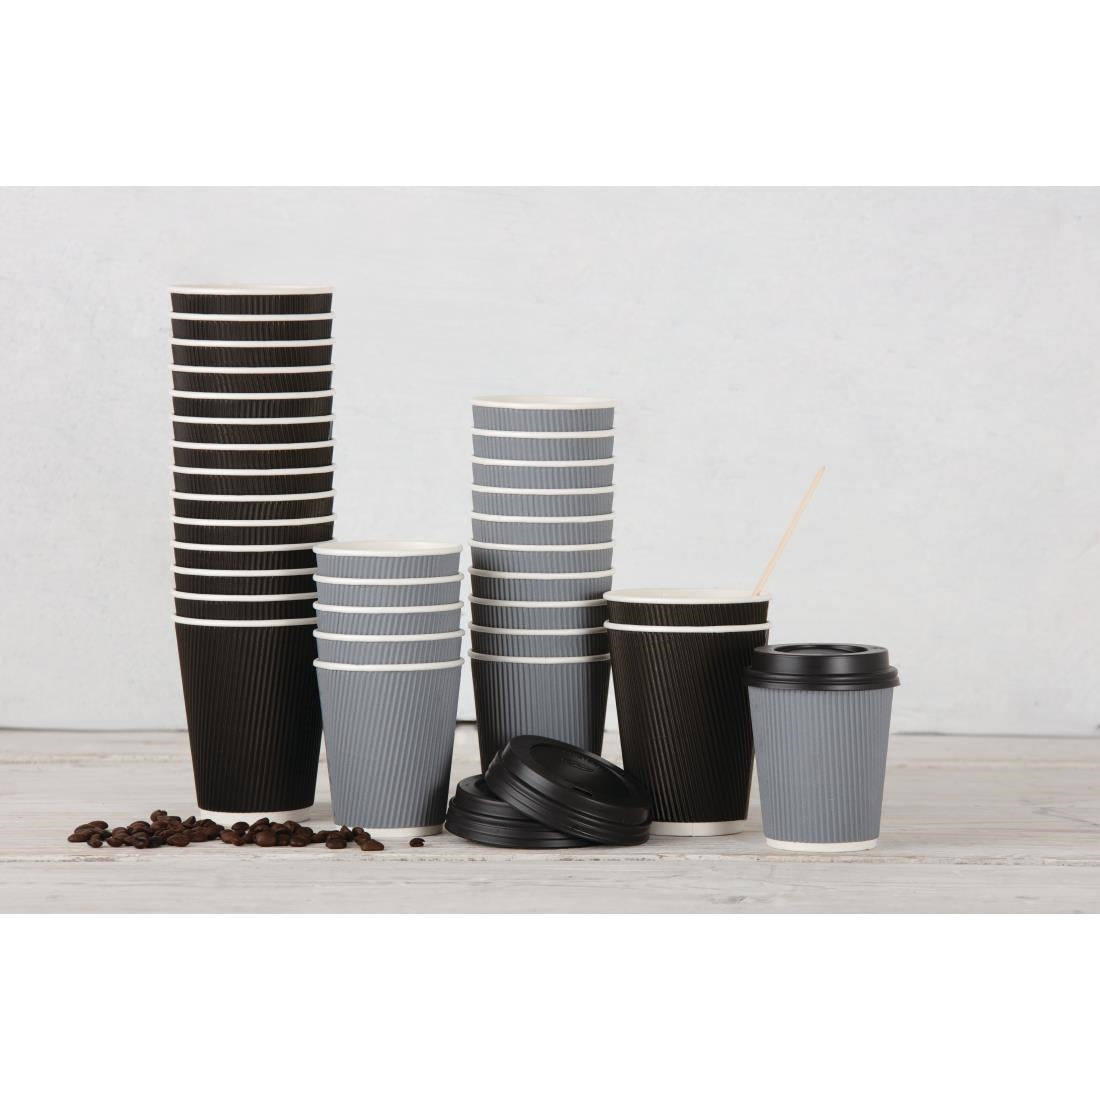 CW718 Fiesta Recyclable Coffee Cup Lids Black 340ml / 12oz and 455ml / 16oz (Pack of 1000) JD Catering Equipment Solutions Ltd